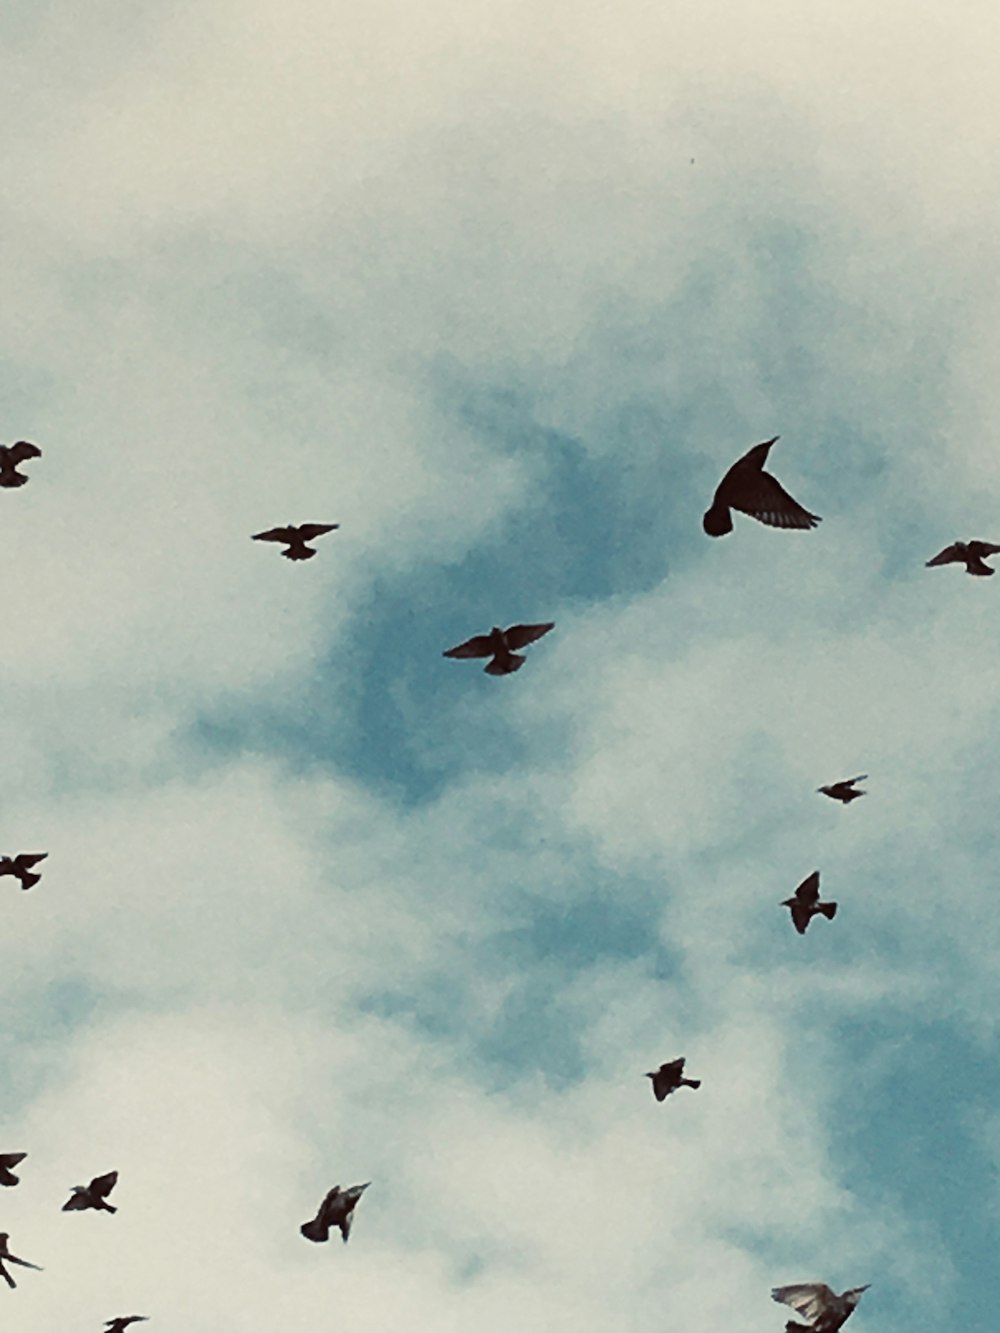 a group of birds flying in the sky